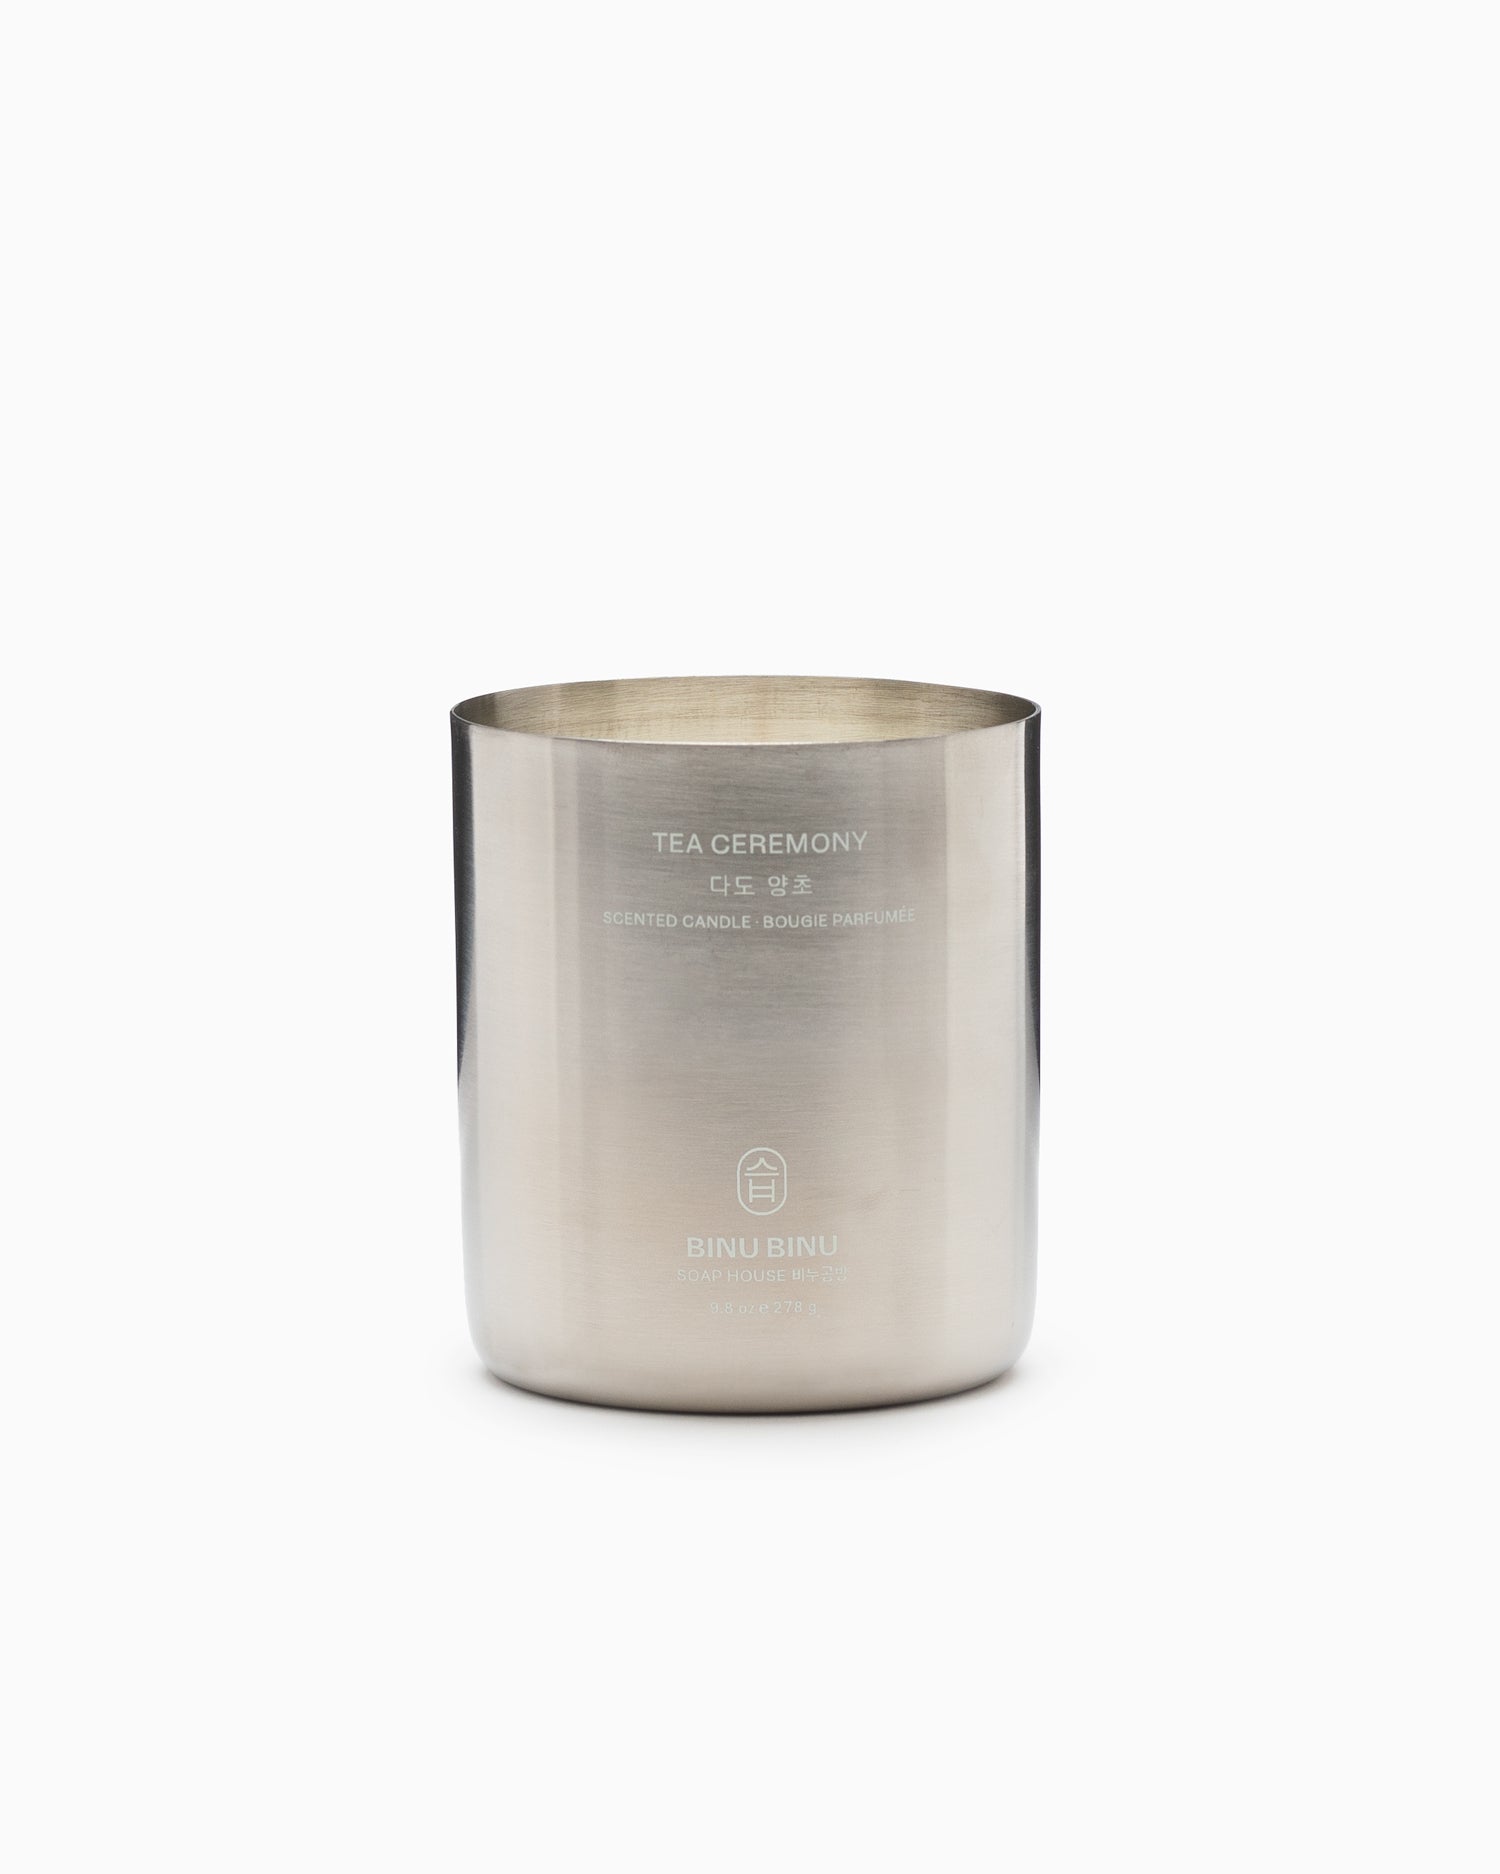 Tea Ceremony - Scented Candle